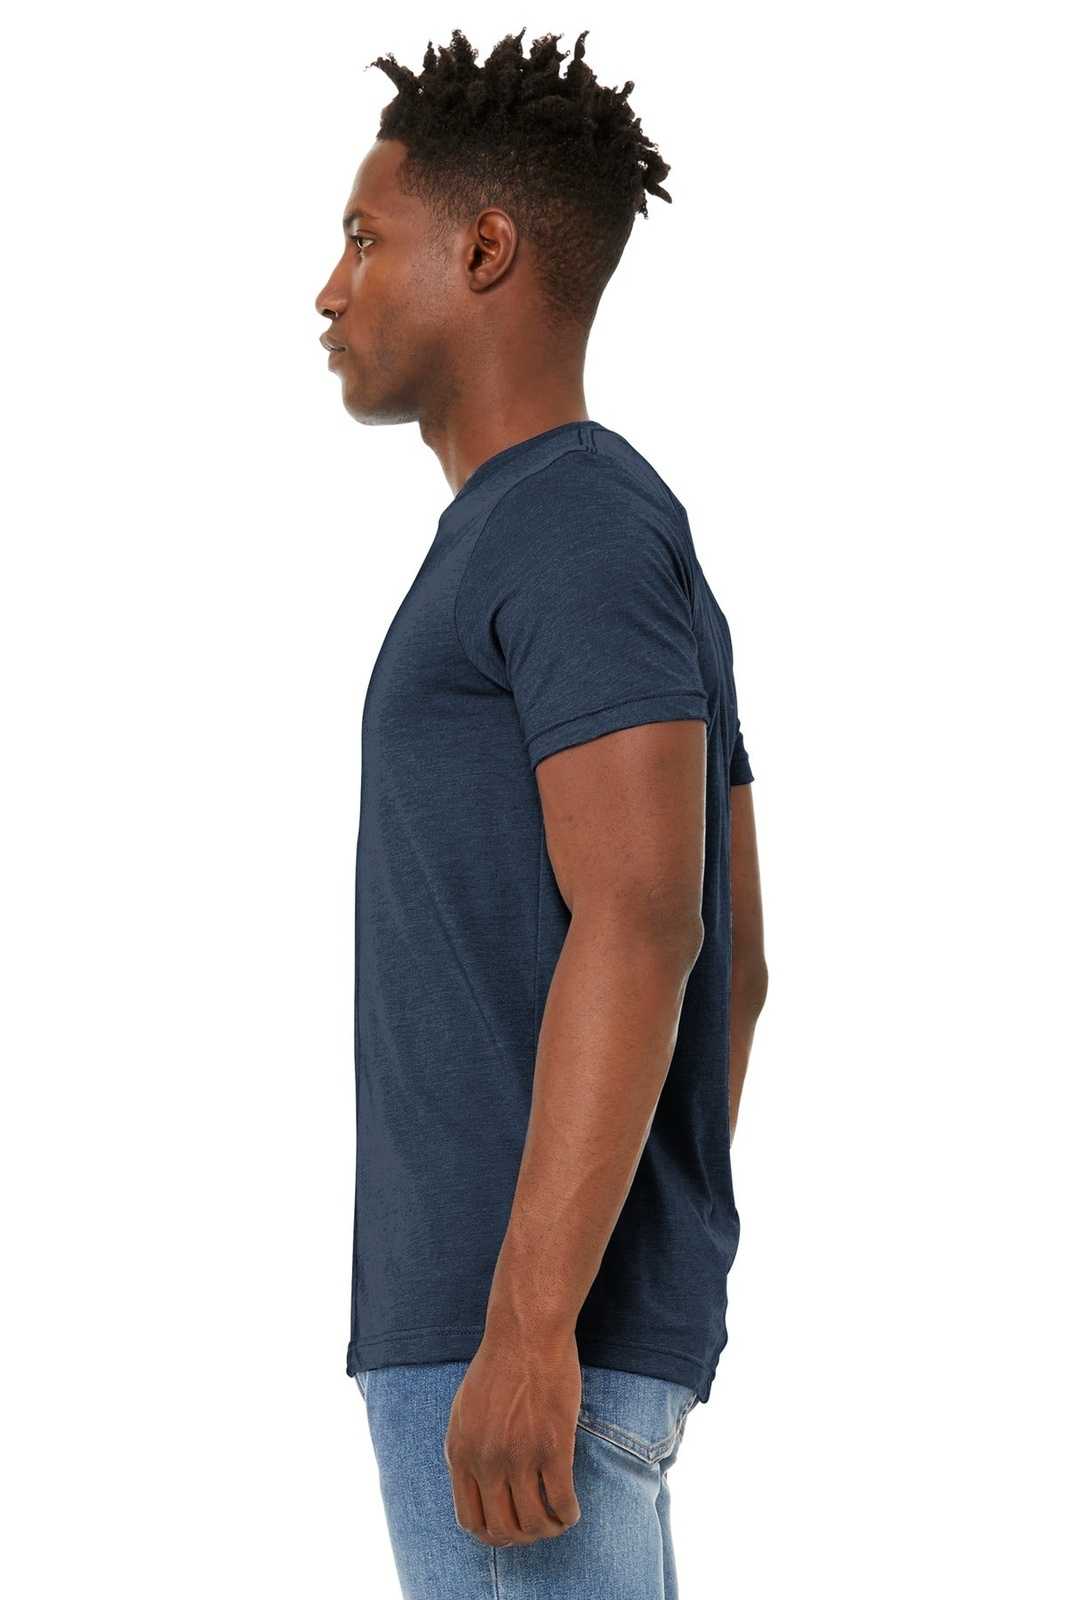 Bella + Canvas 3301 Unisex Sueded Tee - Heather Navy - HIT a Double